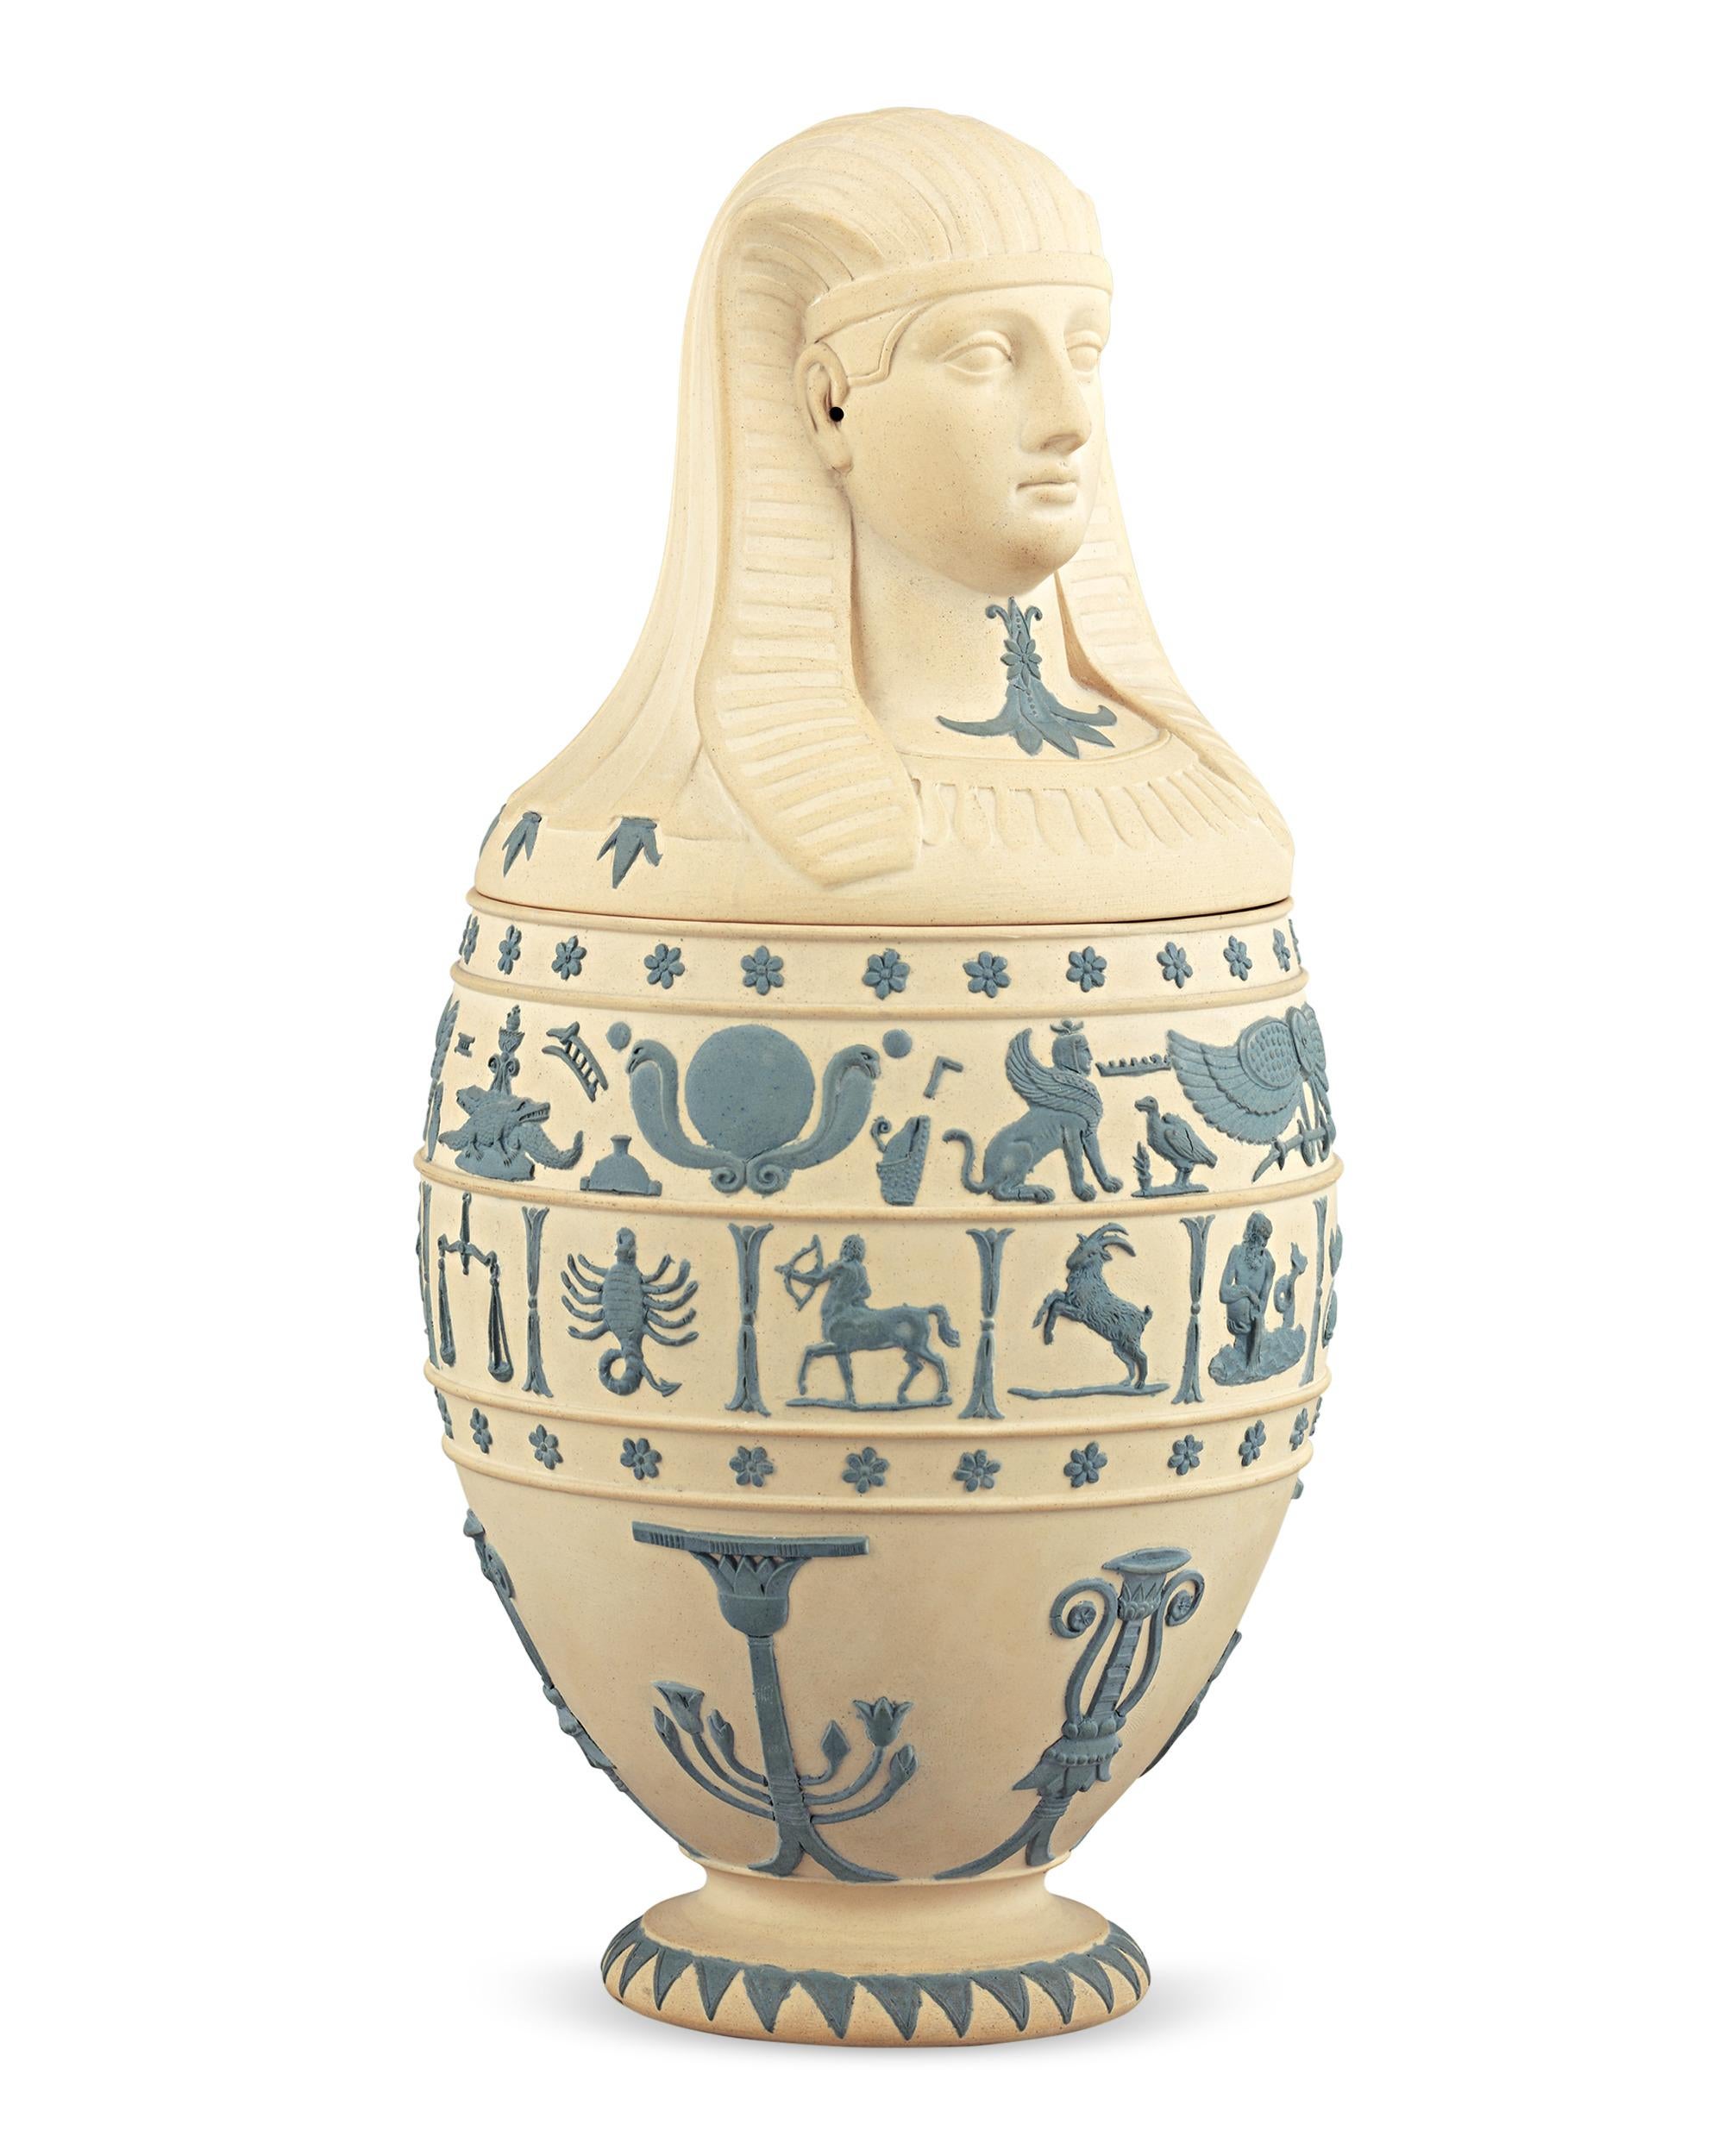 This 19th century Wedgwood caneware vessel takes the form of an Egyptian canopic jar, modeled after the important containers used for afterlife preparation during the process of mummification. Two central friezes of Egyptian artistic motifs and